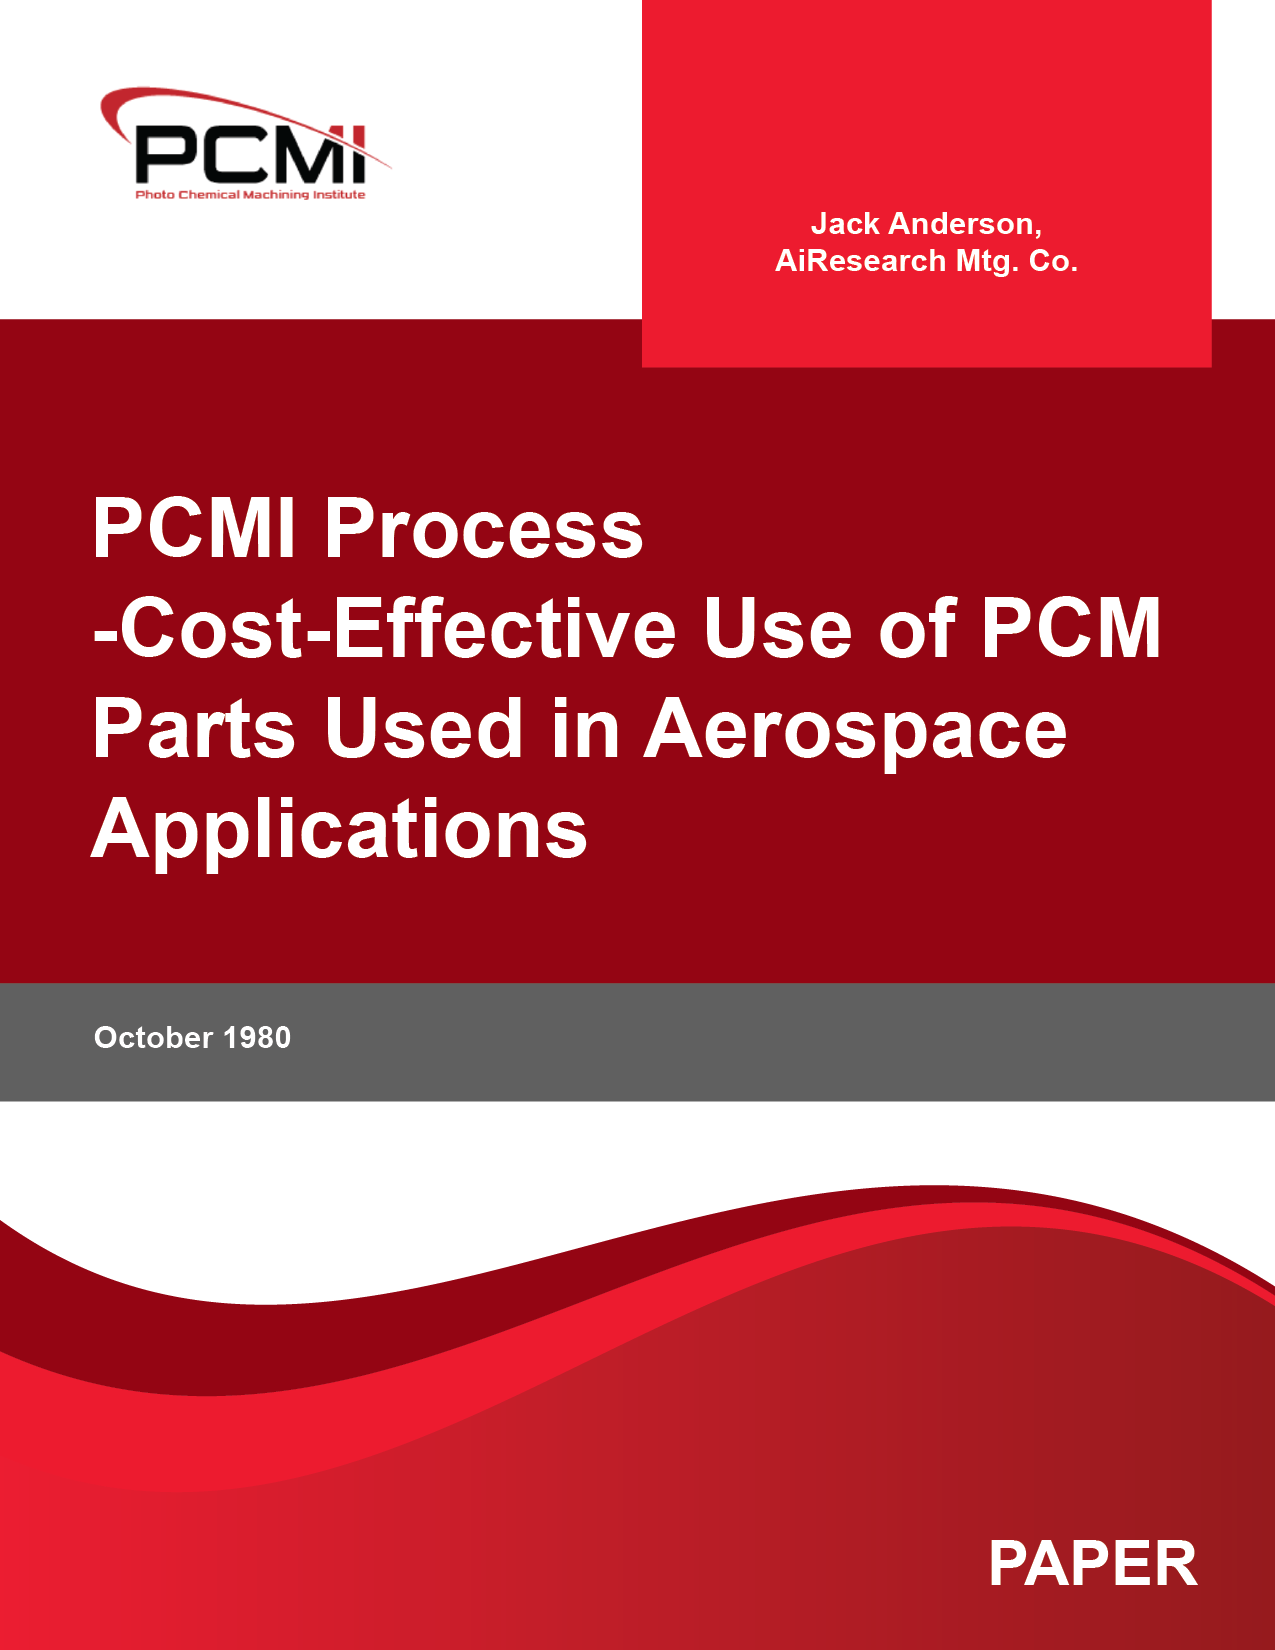 PCMI Process -Cost-Effective Use of PCM Parts Used in Aerospace Applications